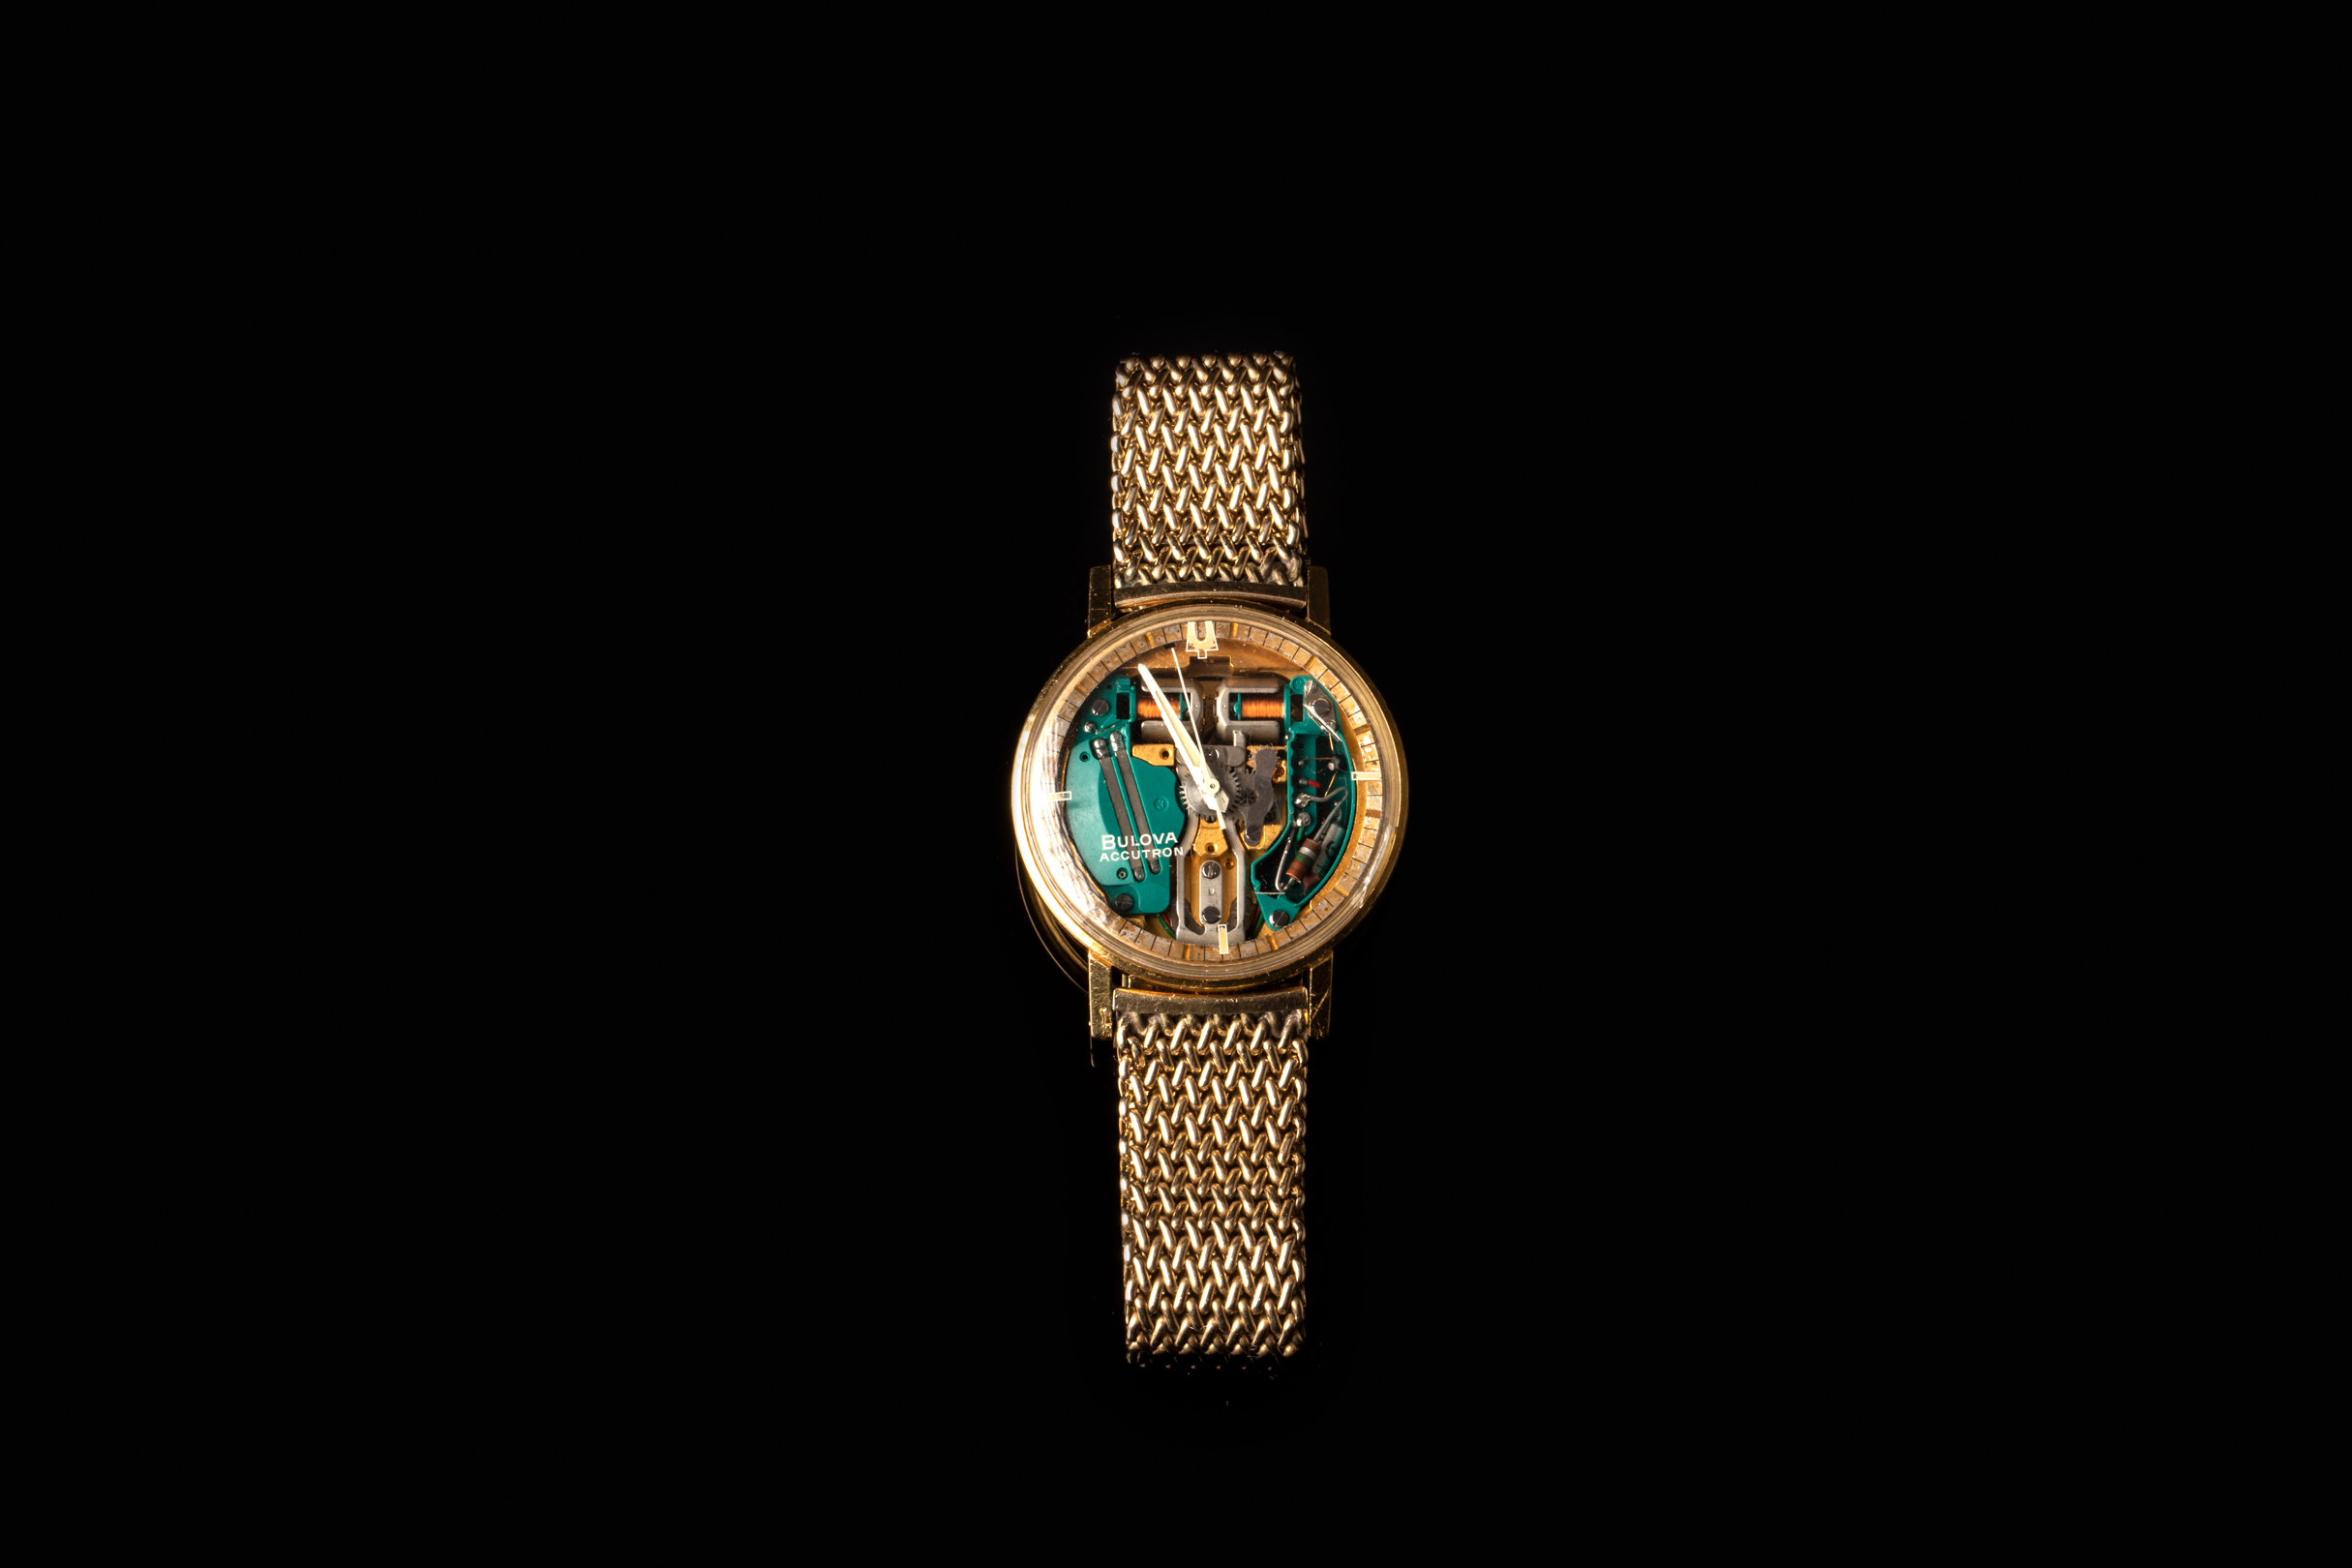 Accutron Watch: the new brand, the storyline, the current offering